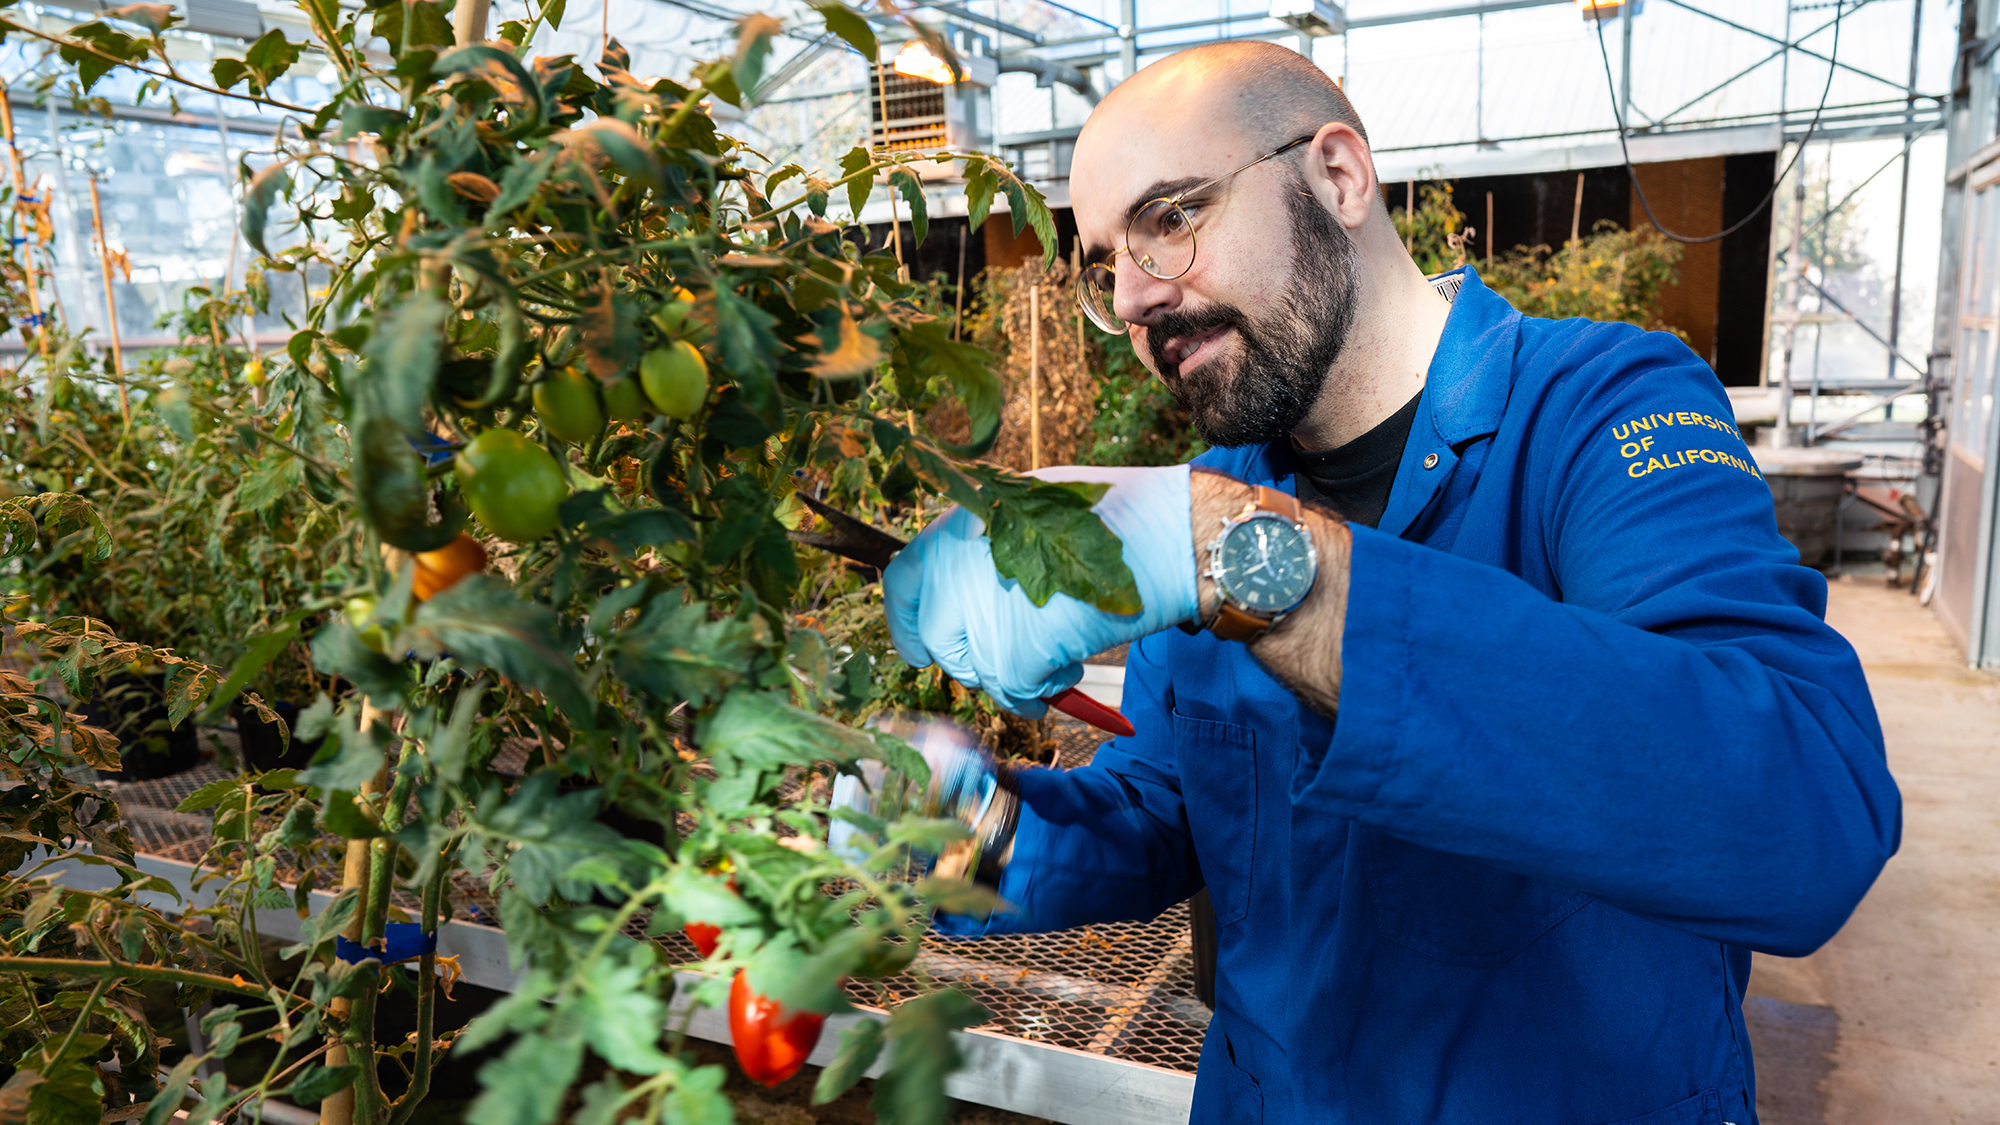 Alex Cantó-Pastor, a postdoctoral scholar working with Siobhan Brady, used mutant tomato plants to understand suberin’s role in drought tolerance. (TJ Ushing/UC Davis) 